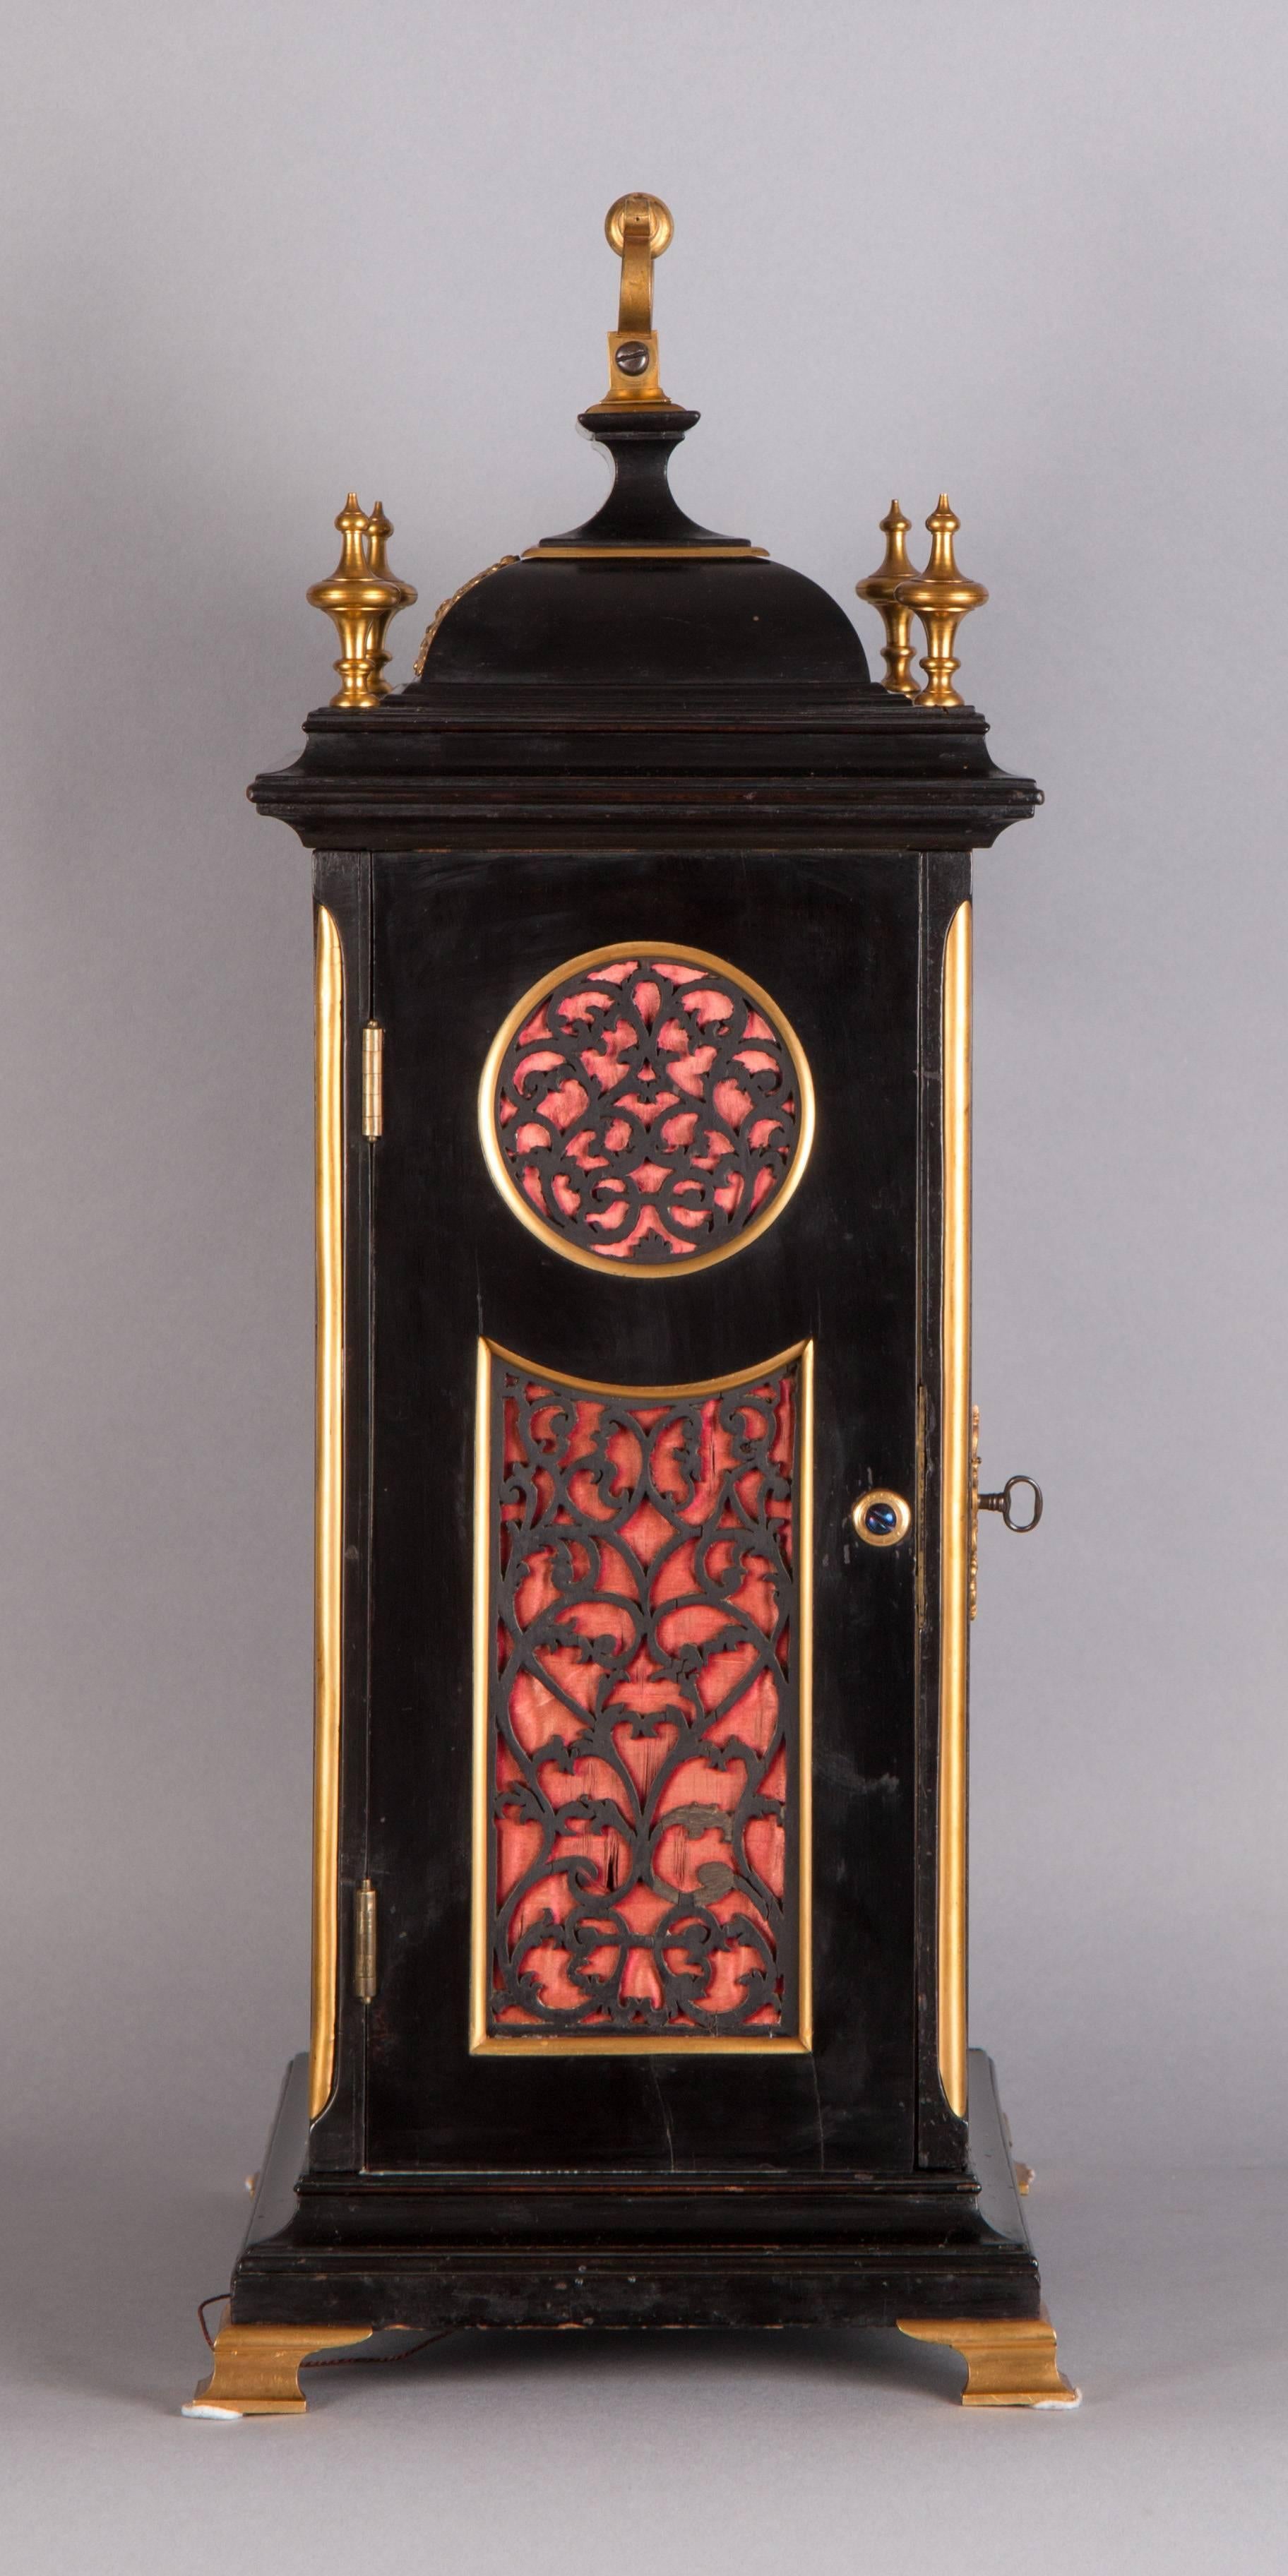 Signed on plate and dial: “Georg Erh. Finely Kiel.“
Height: 51 cm, width: 32 cm, depth: 22 cm, duration: 8 days.

Ebonised wooden case, partly gilt, with fire-gilt brass mounts, moldings, grips and feet, front arched brass panel with silvered